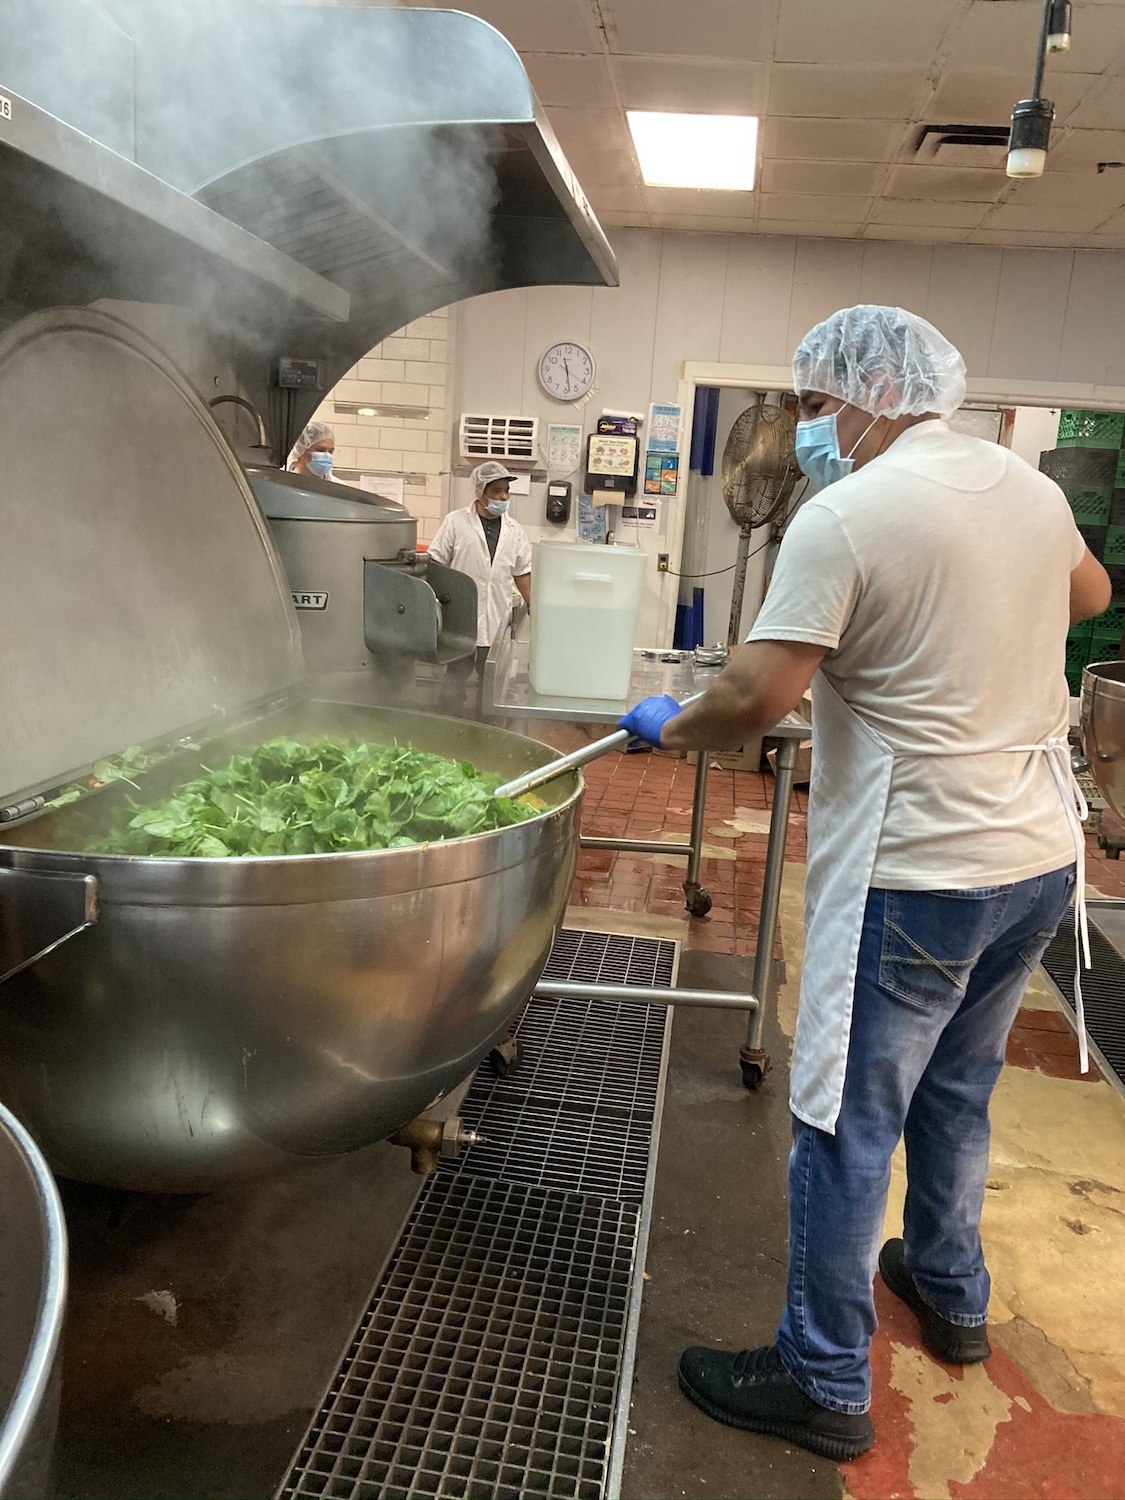 A worker cooks spinach in PPE in a large vat. October 2020